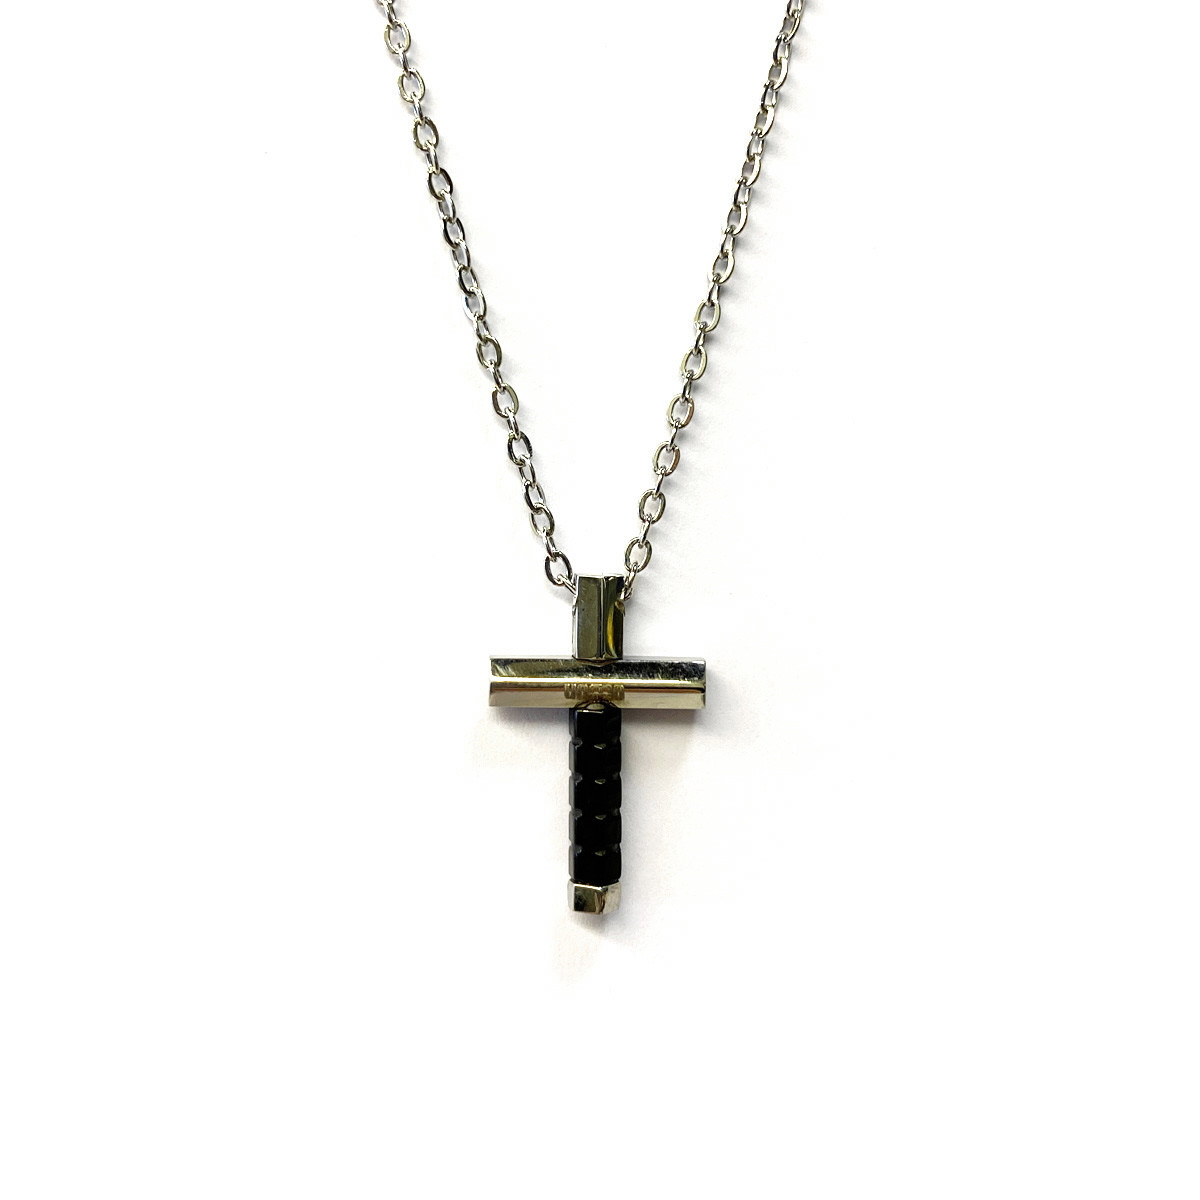 NECKLACE WITH BICOLOUR STEEL CROSS